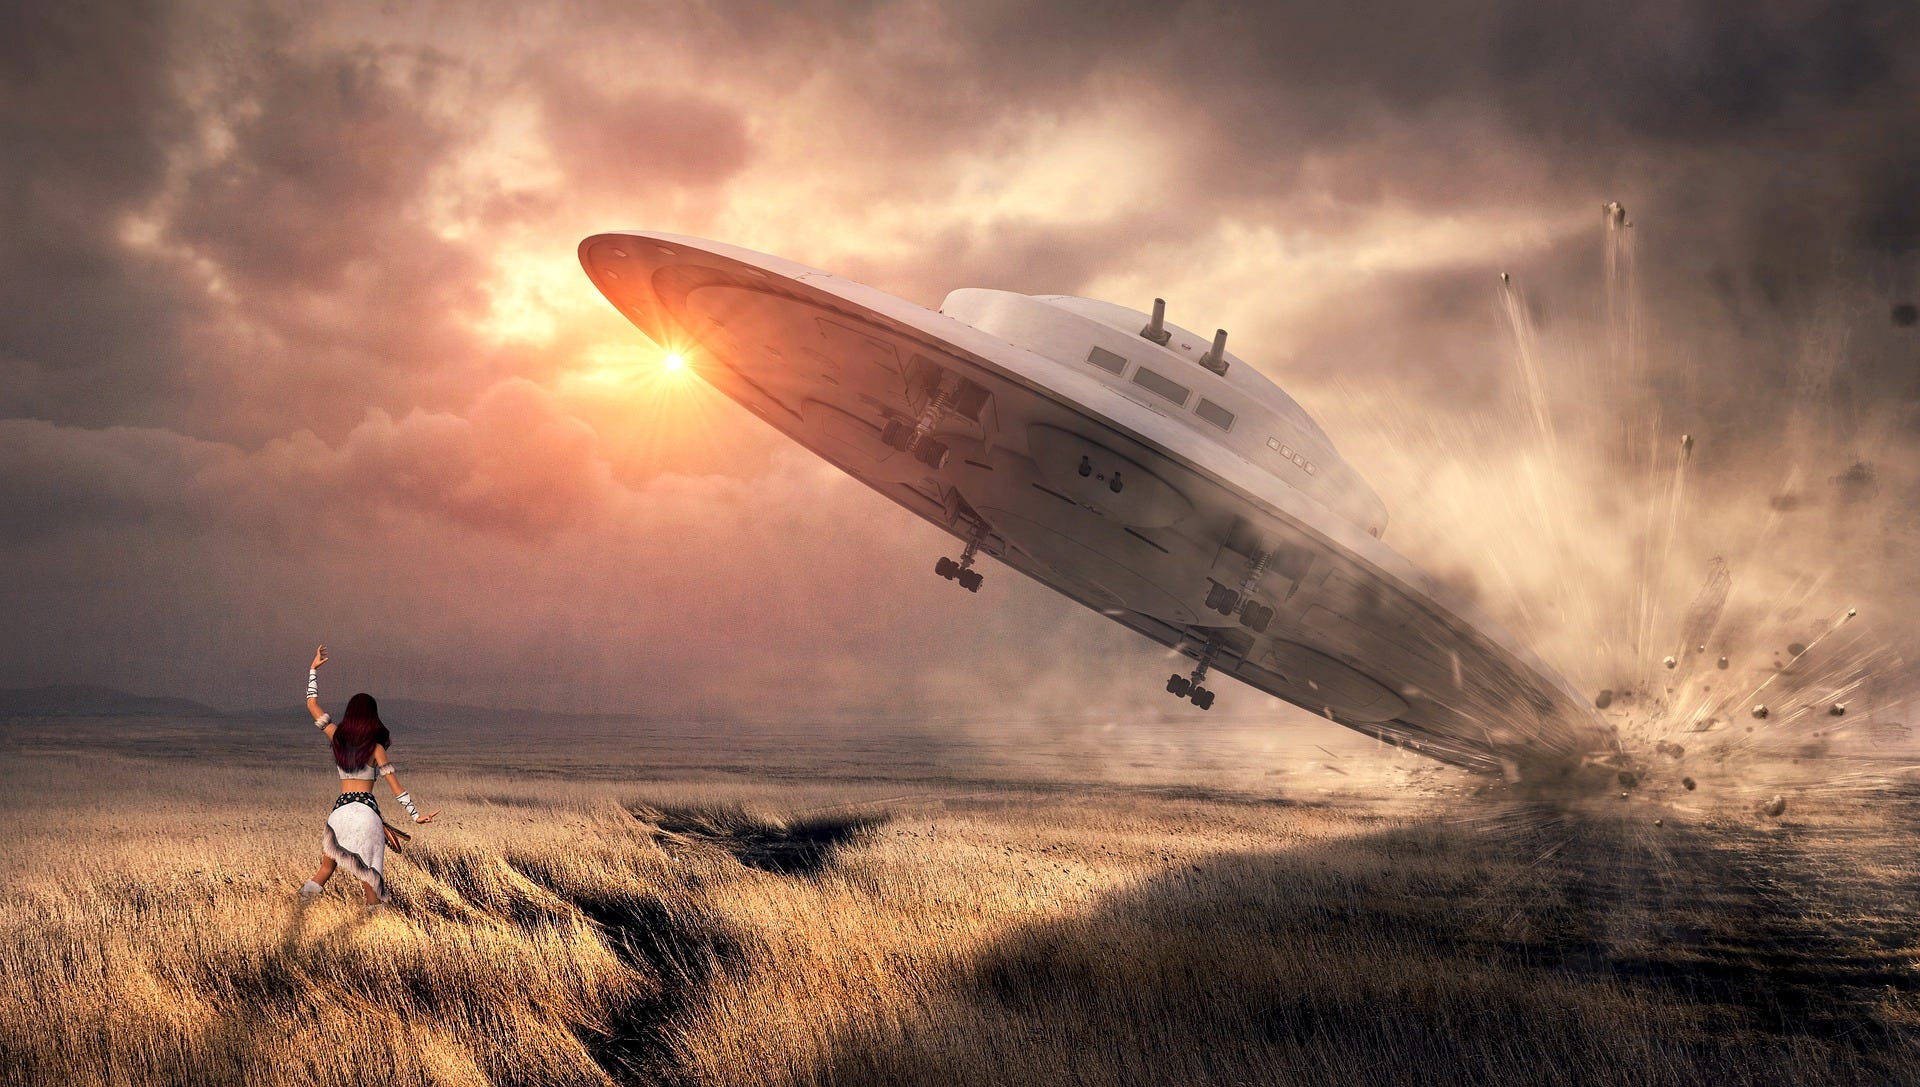 UFO Incident in Kazakhstan: The Account of a Shepherd’s Encounter with